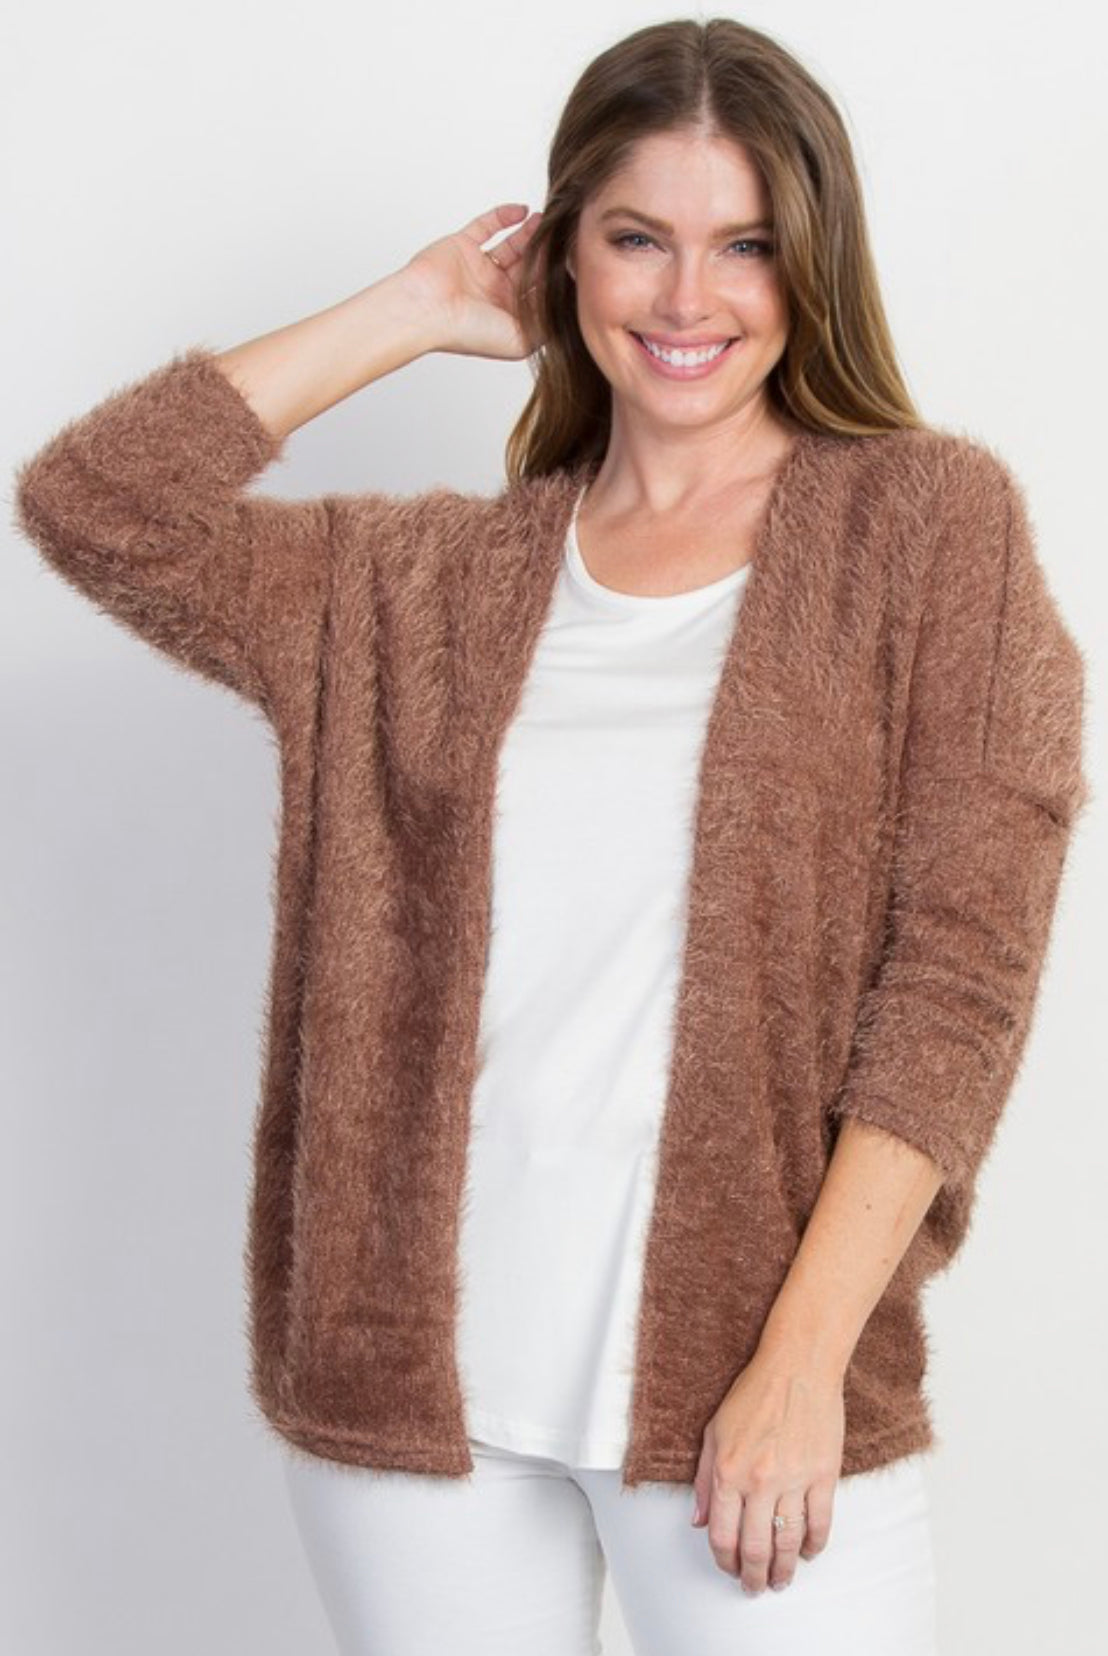 Light as a Feather Cardigan